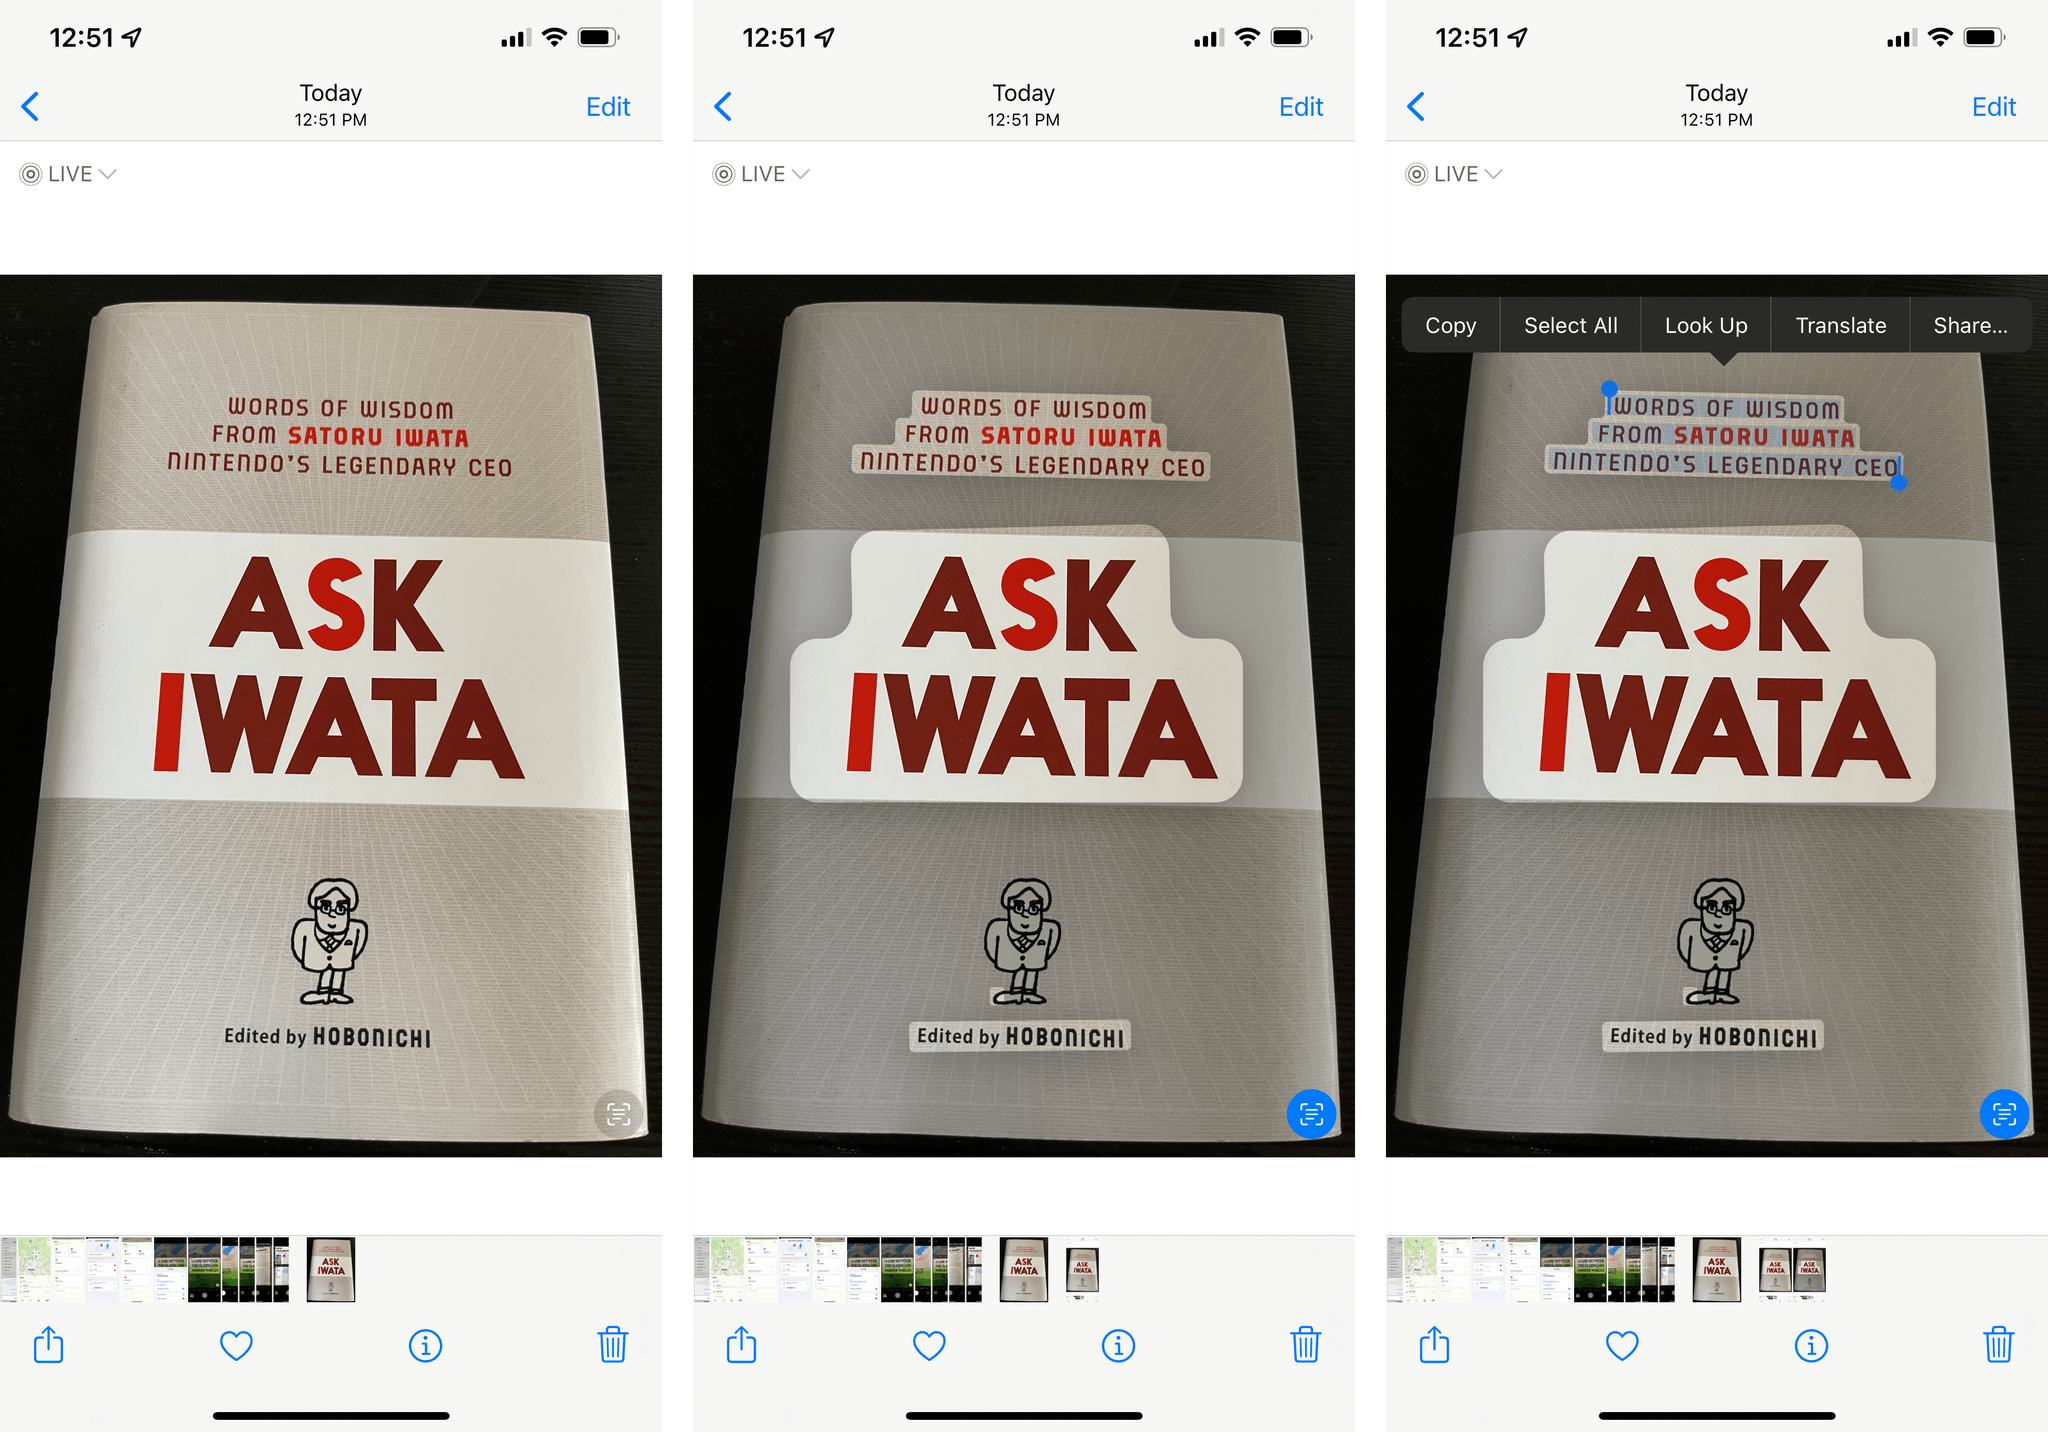 In Photos, you can highlight text found in images and perform the same actions supported in the Camera app.